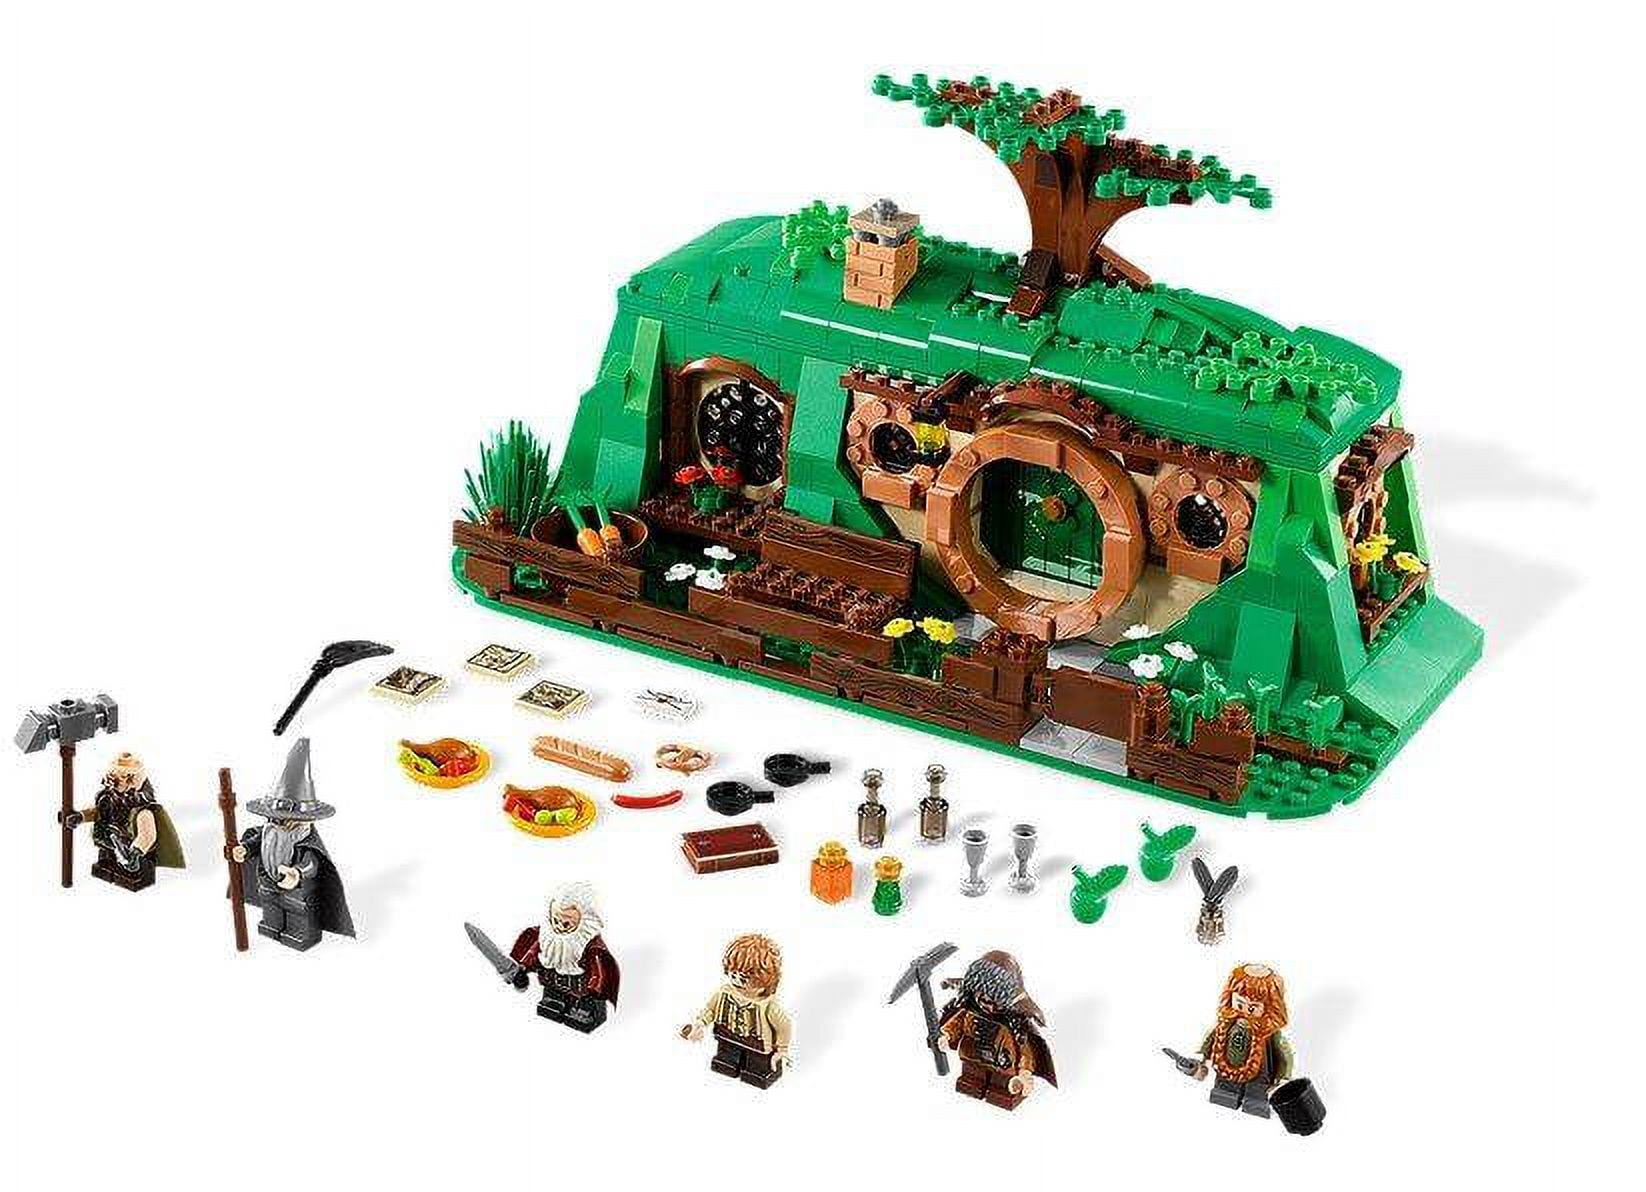 LEGO? Lord of the Rings LOTR The Hobbit An Unexpected Gathering Playset |  79003